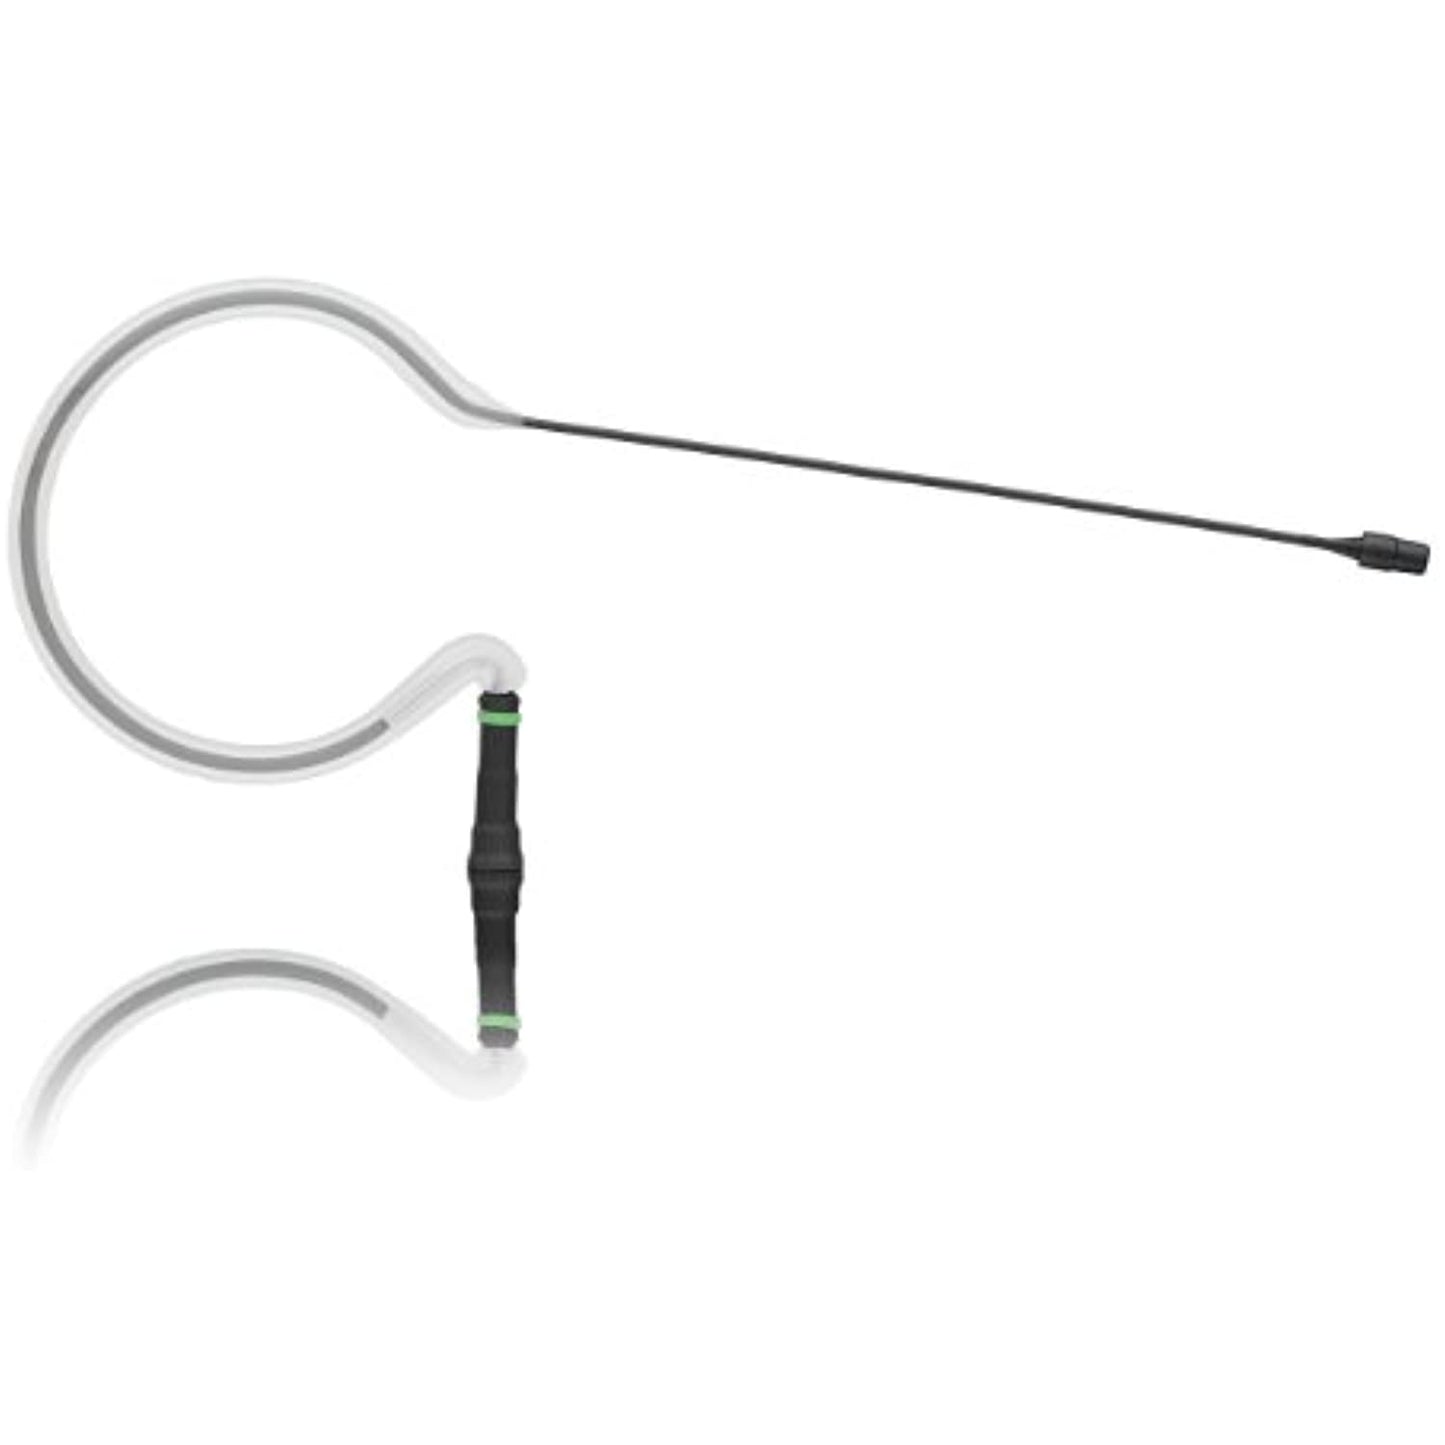 Countryman E6IDW6B2S1 Soft E6i Directional Earset with 2 mm Cable for Sennheiser Transmitter (Black)